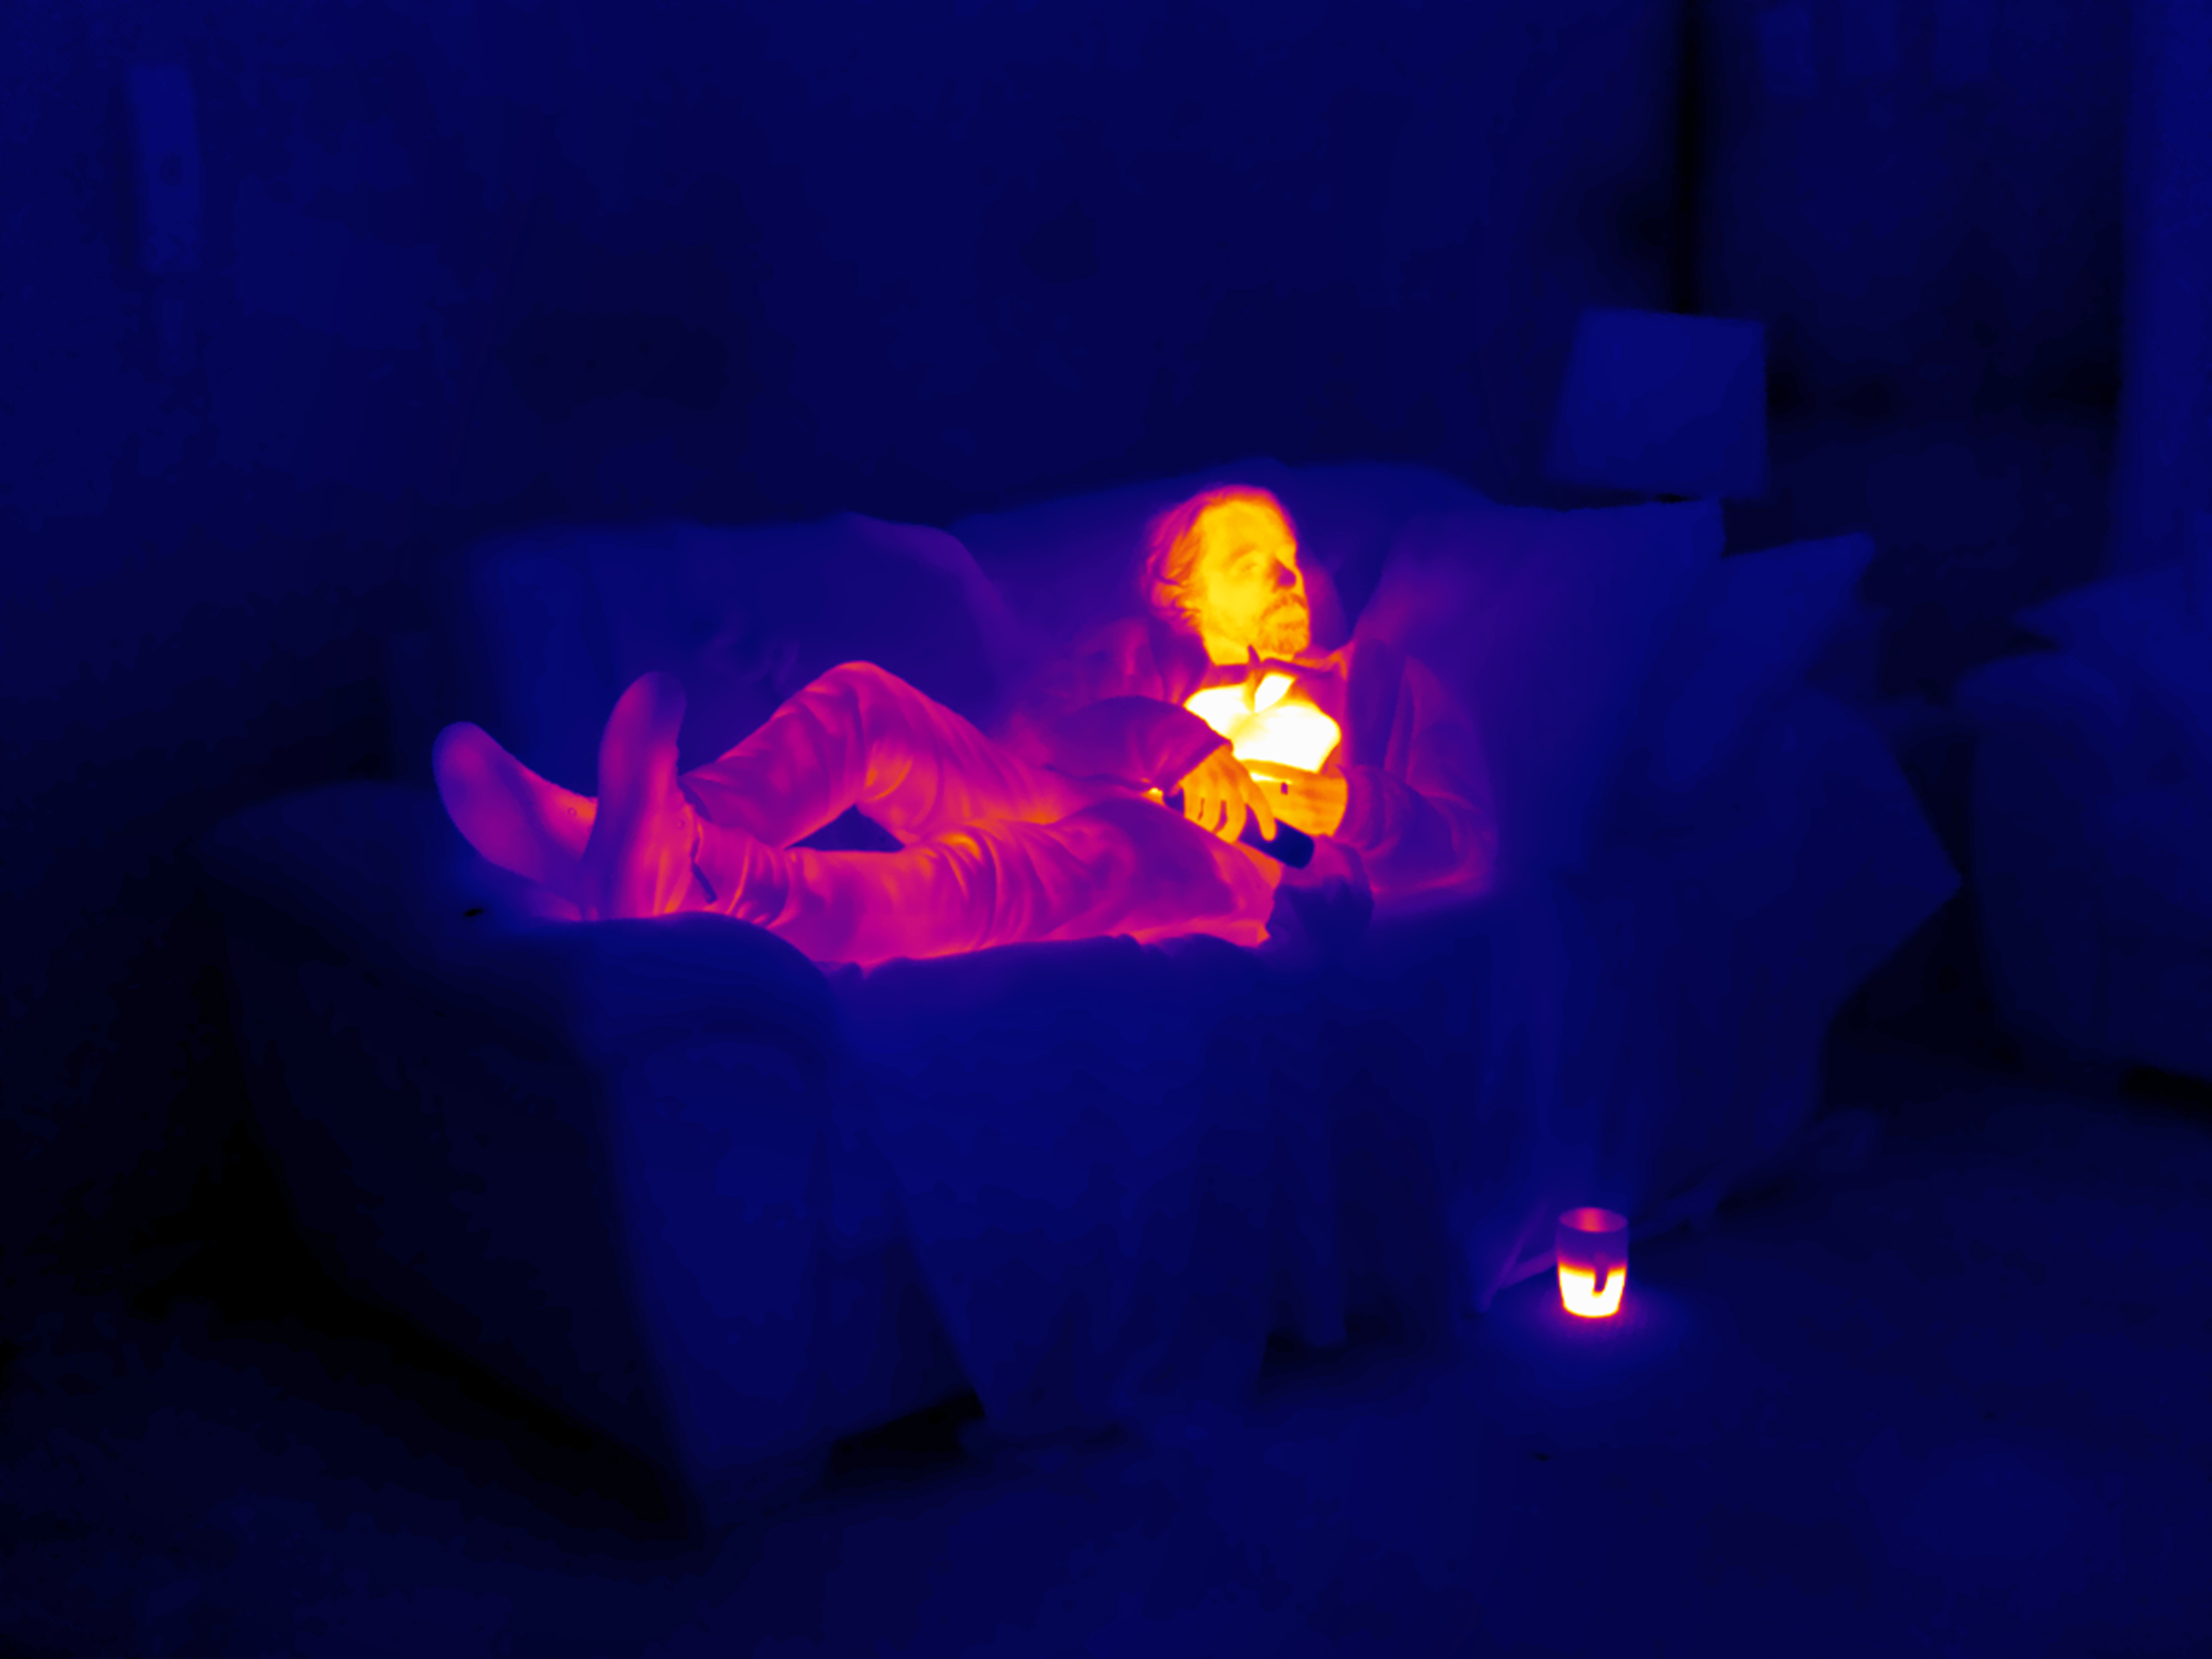 Thermal image of a man lying on a sofa